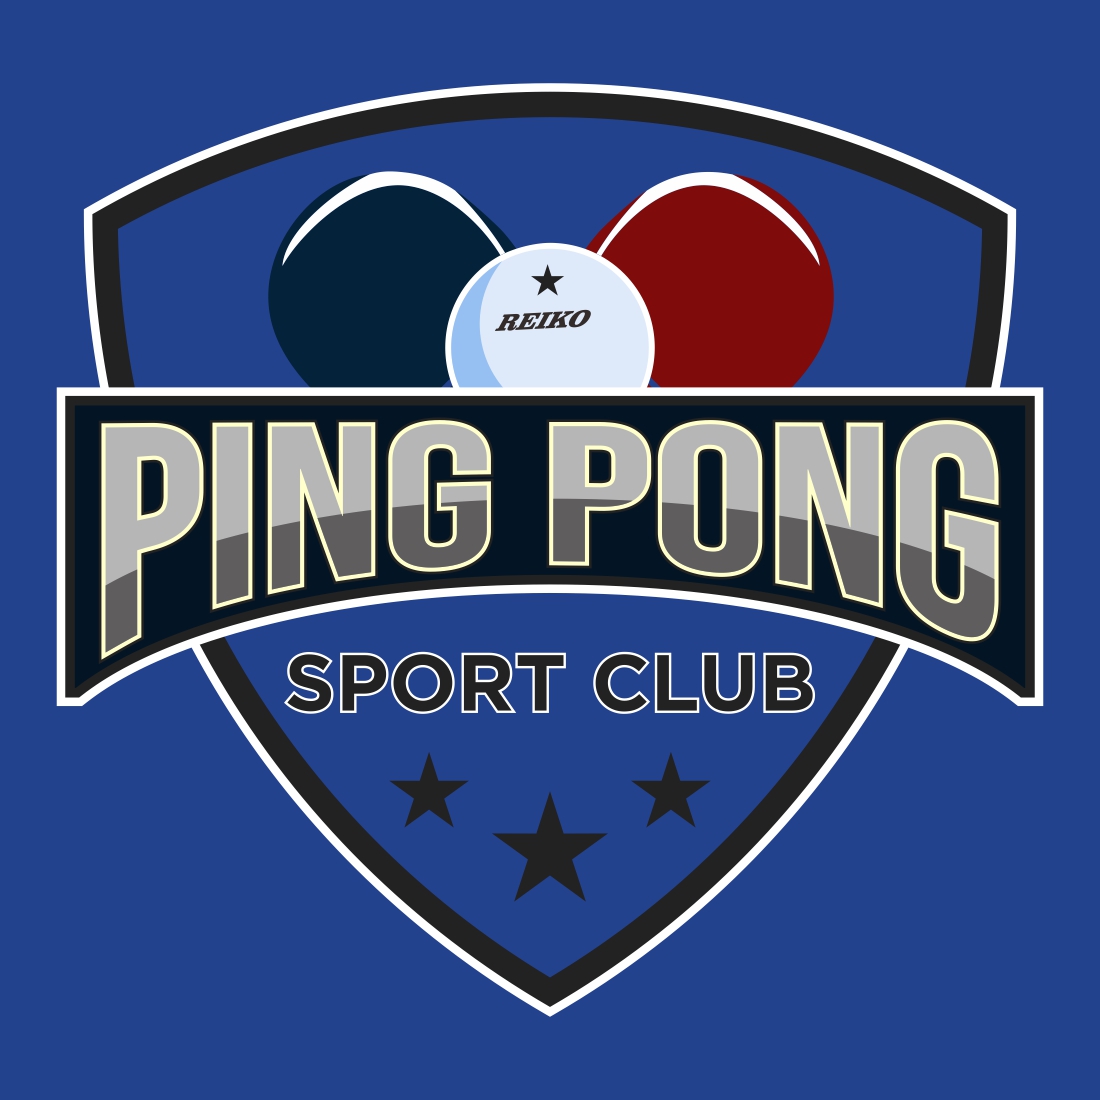 Table tennis badge emblem logo Sports label vector illustration for a ping pong club preview image.